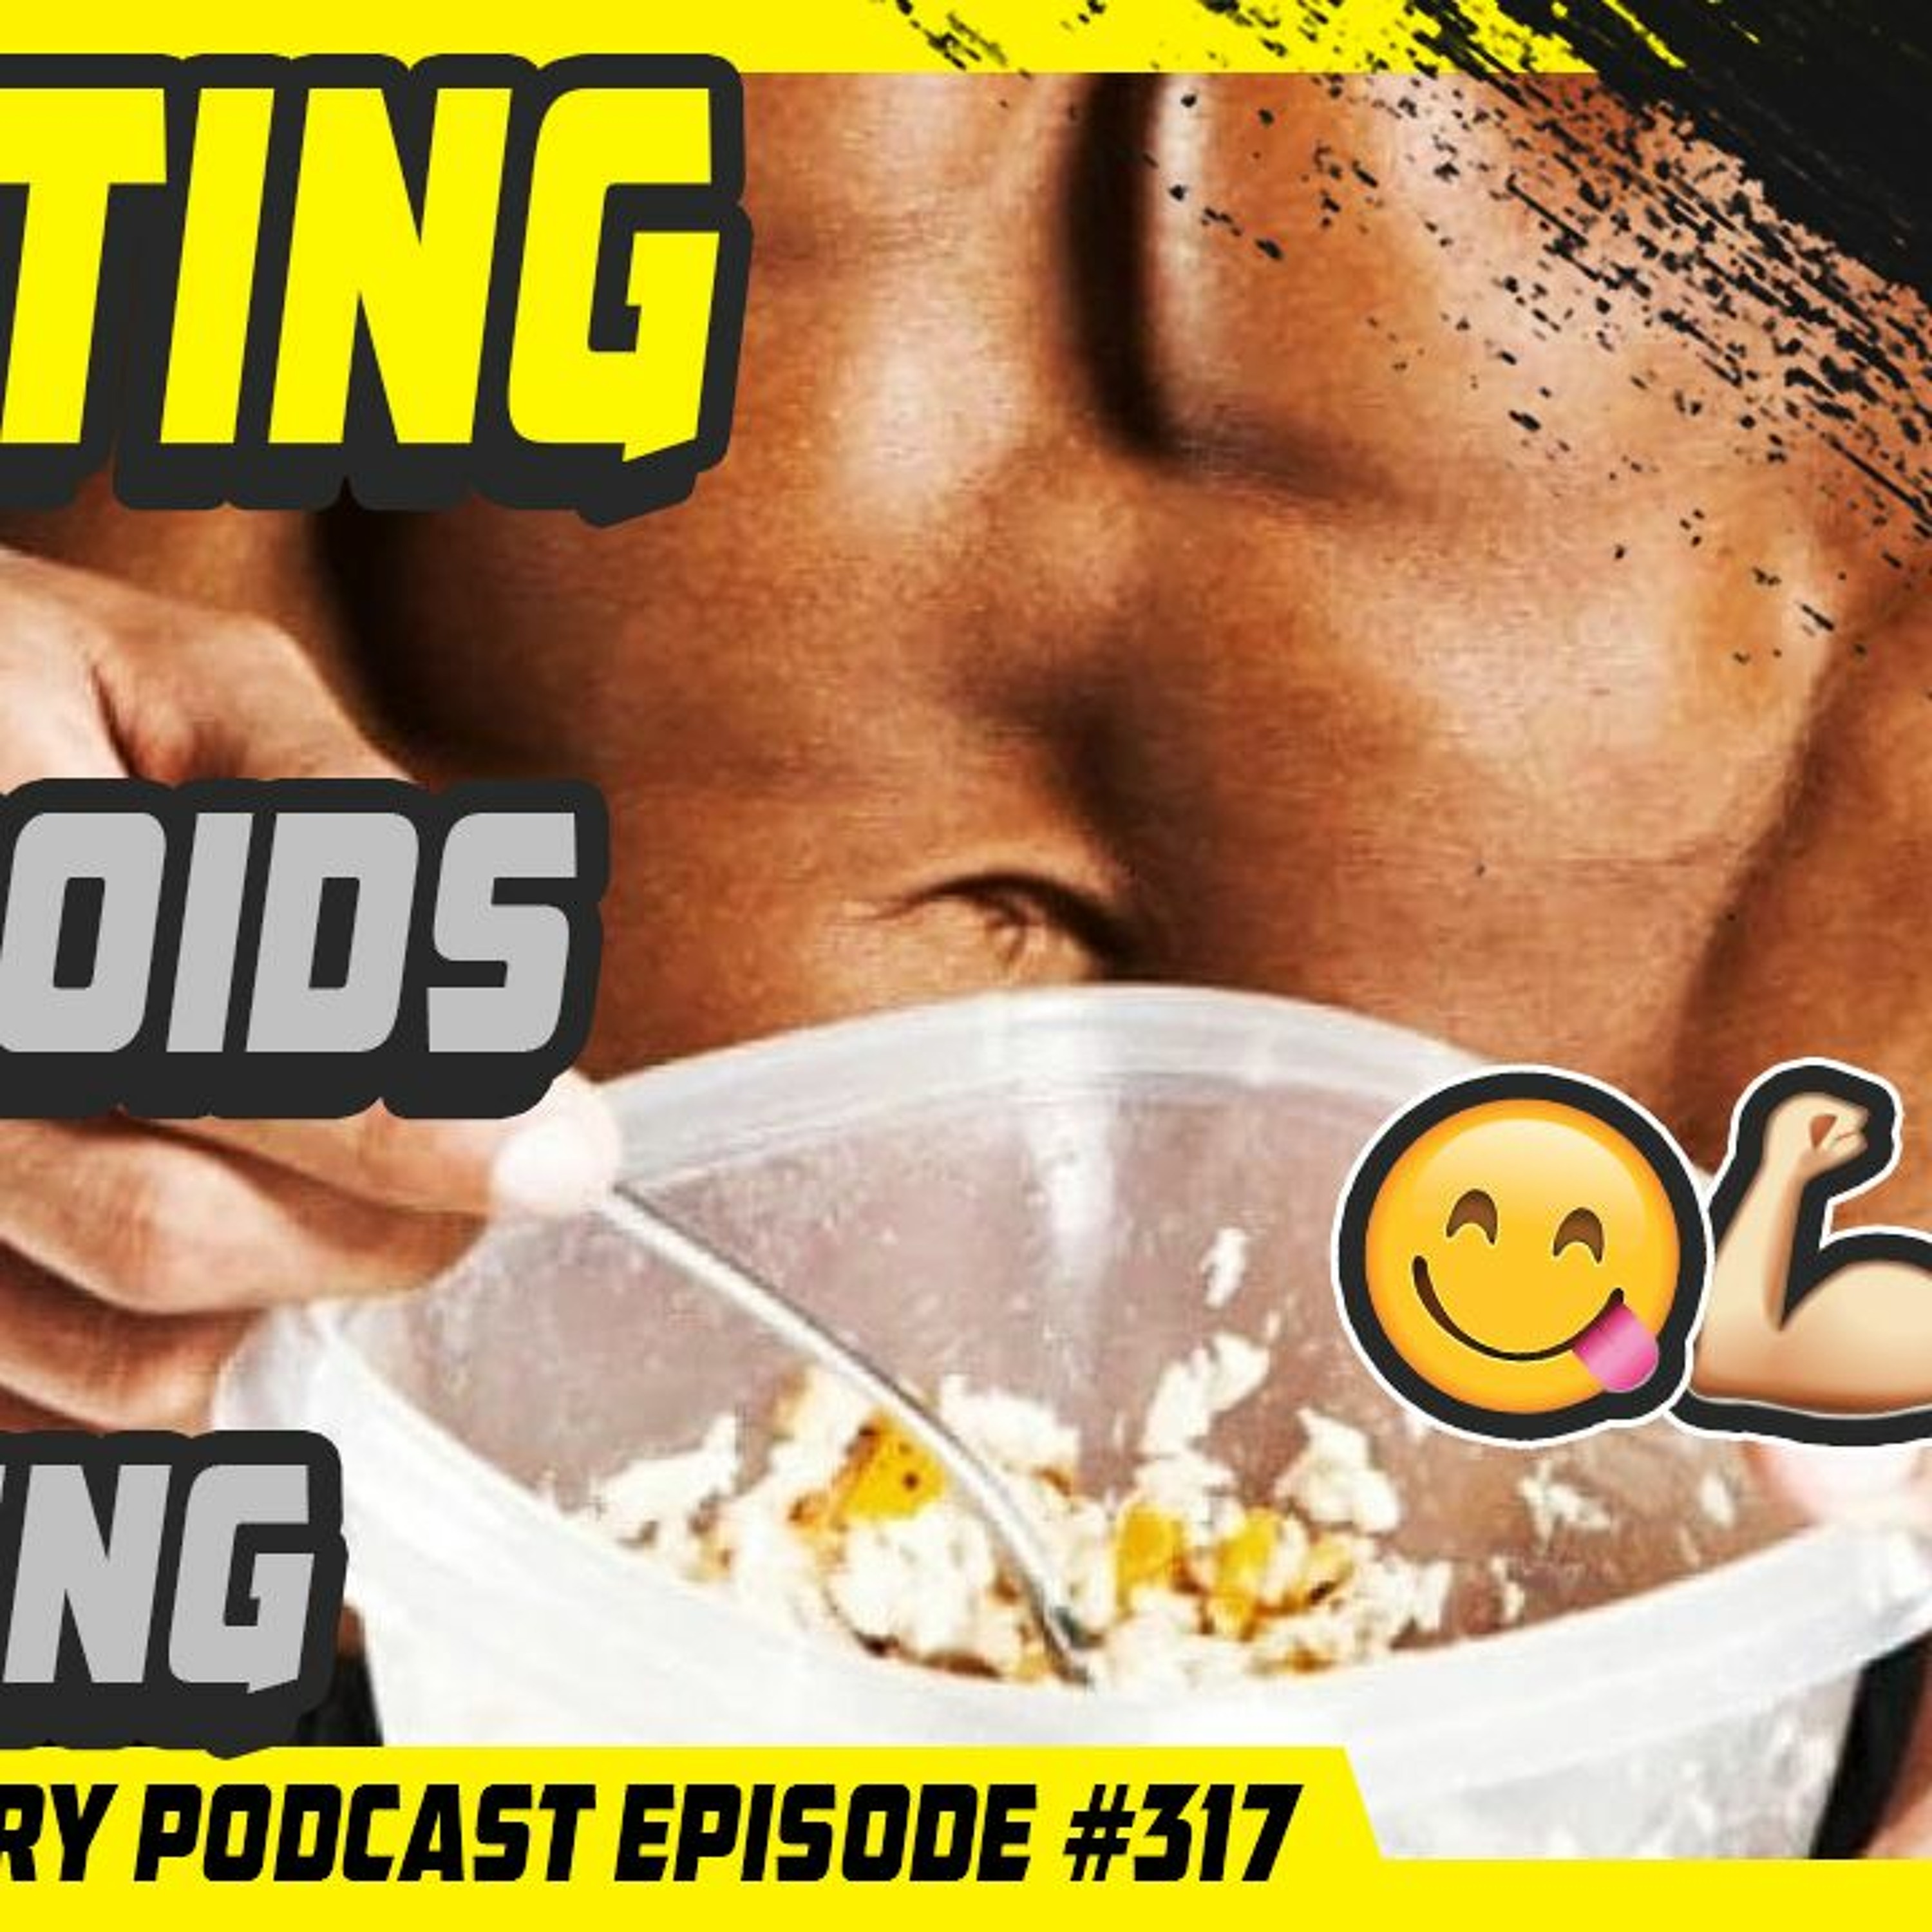 Evolutionary Podcast #317 - [Q&A] Fasting and Steroids for cutting